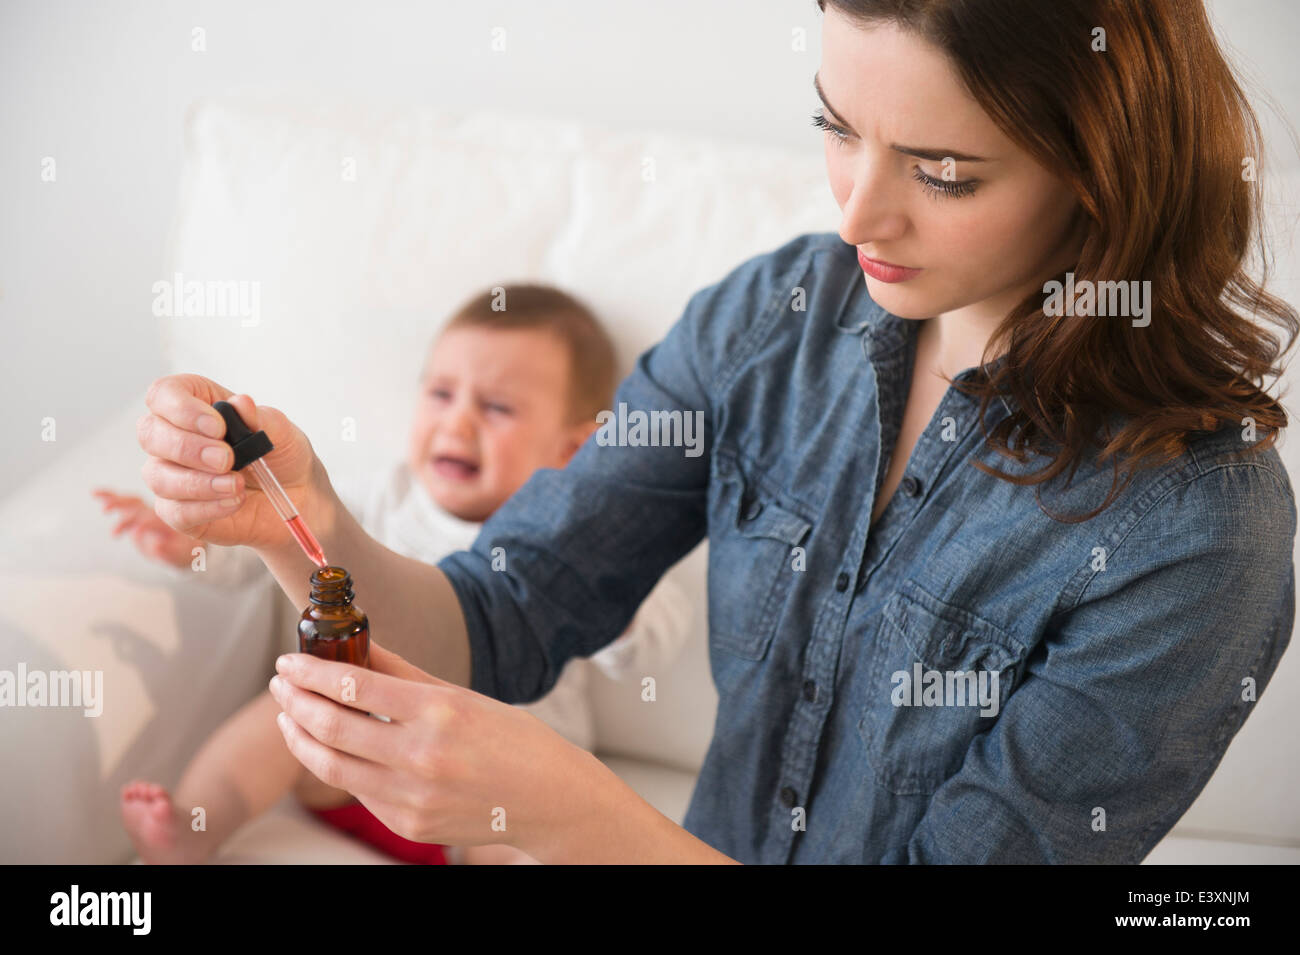 Mother giving crying baby medicine Stock Photo